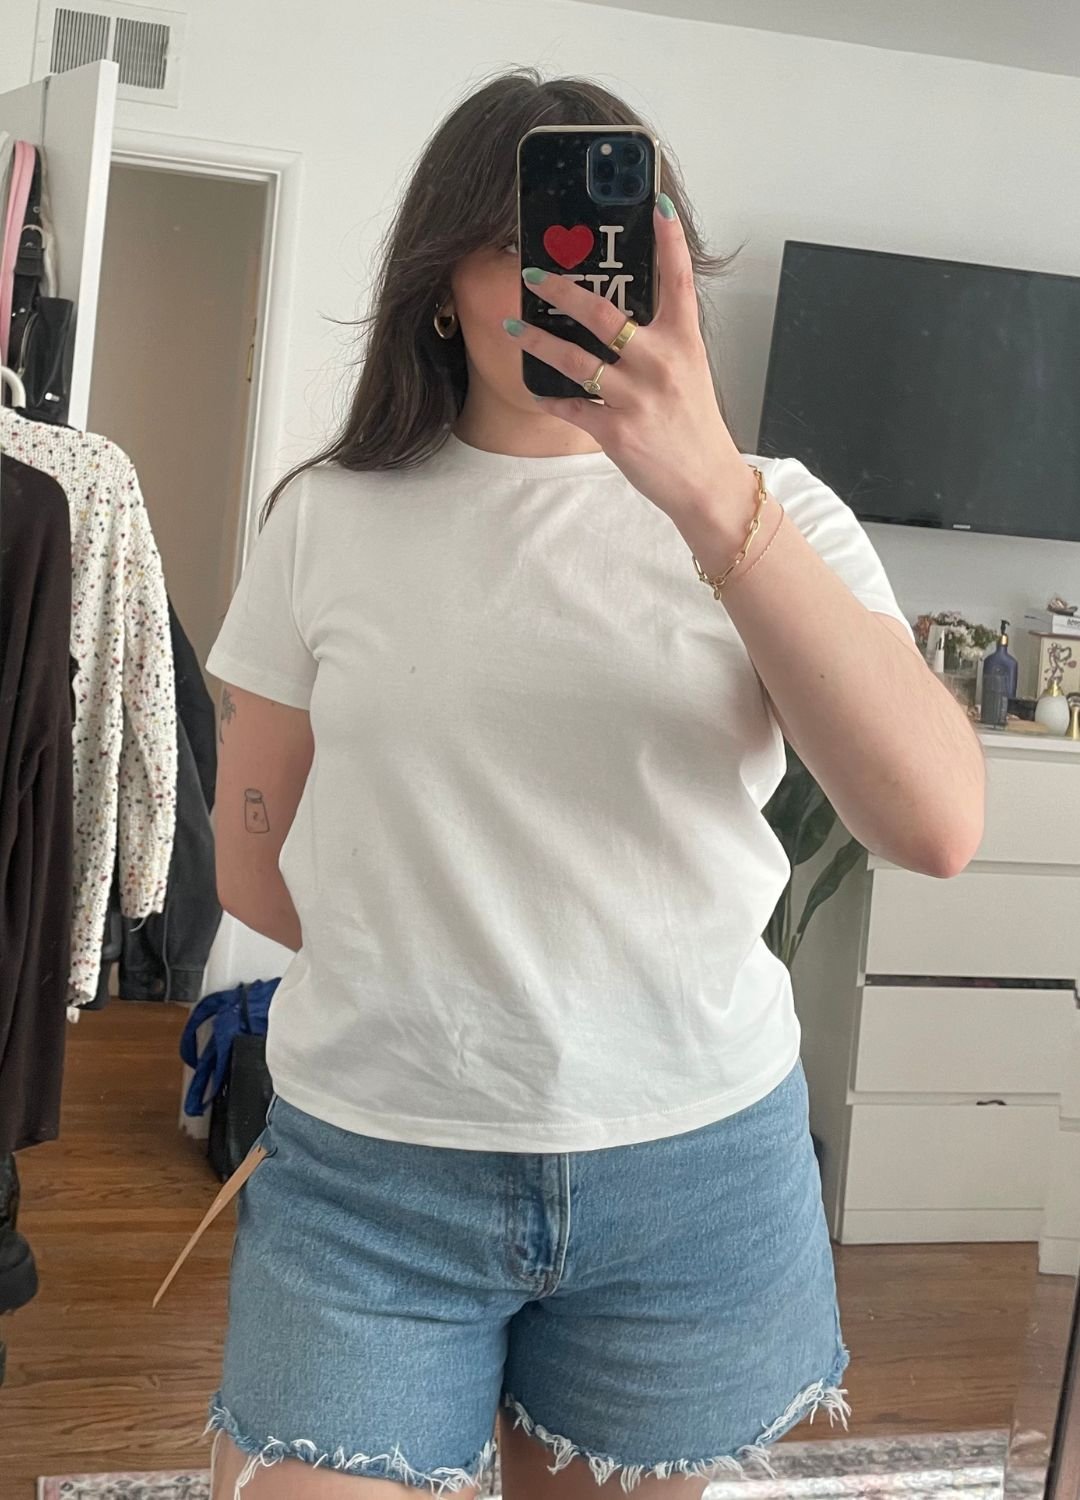 I Tried 14 of the Most Popular White Tees—This $12 One Was the Winner